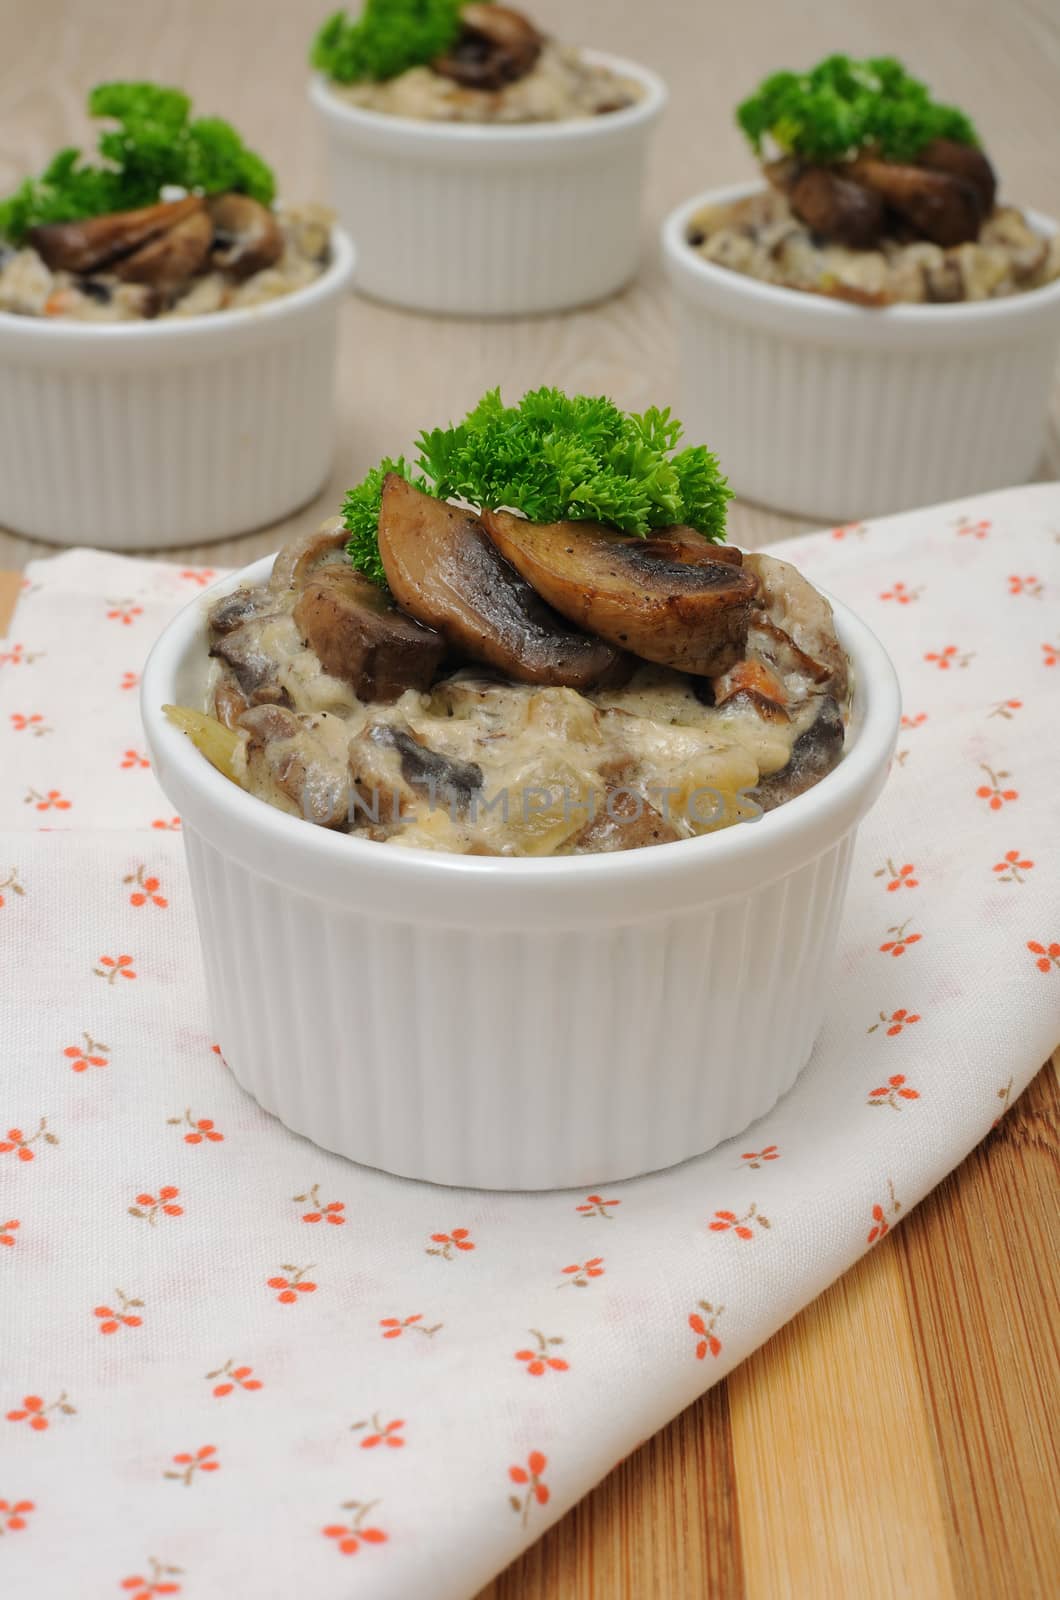 Mushrooms in a creamy sauce by Apolonia